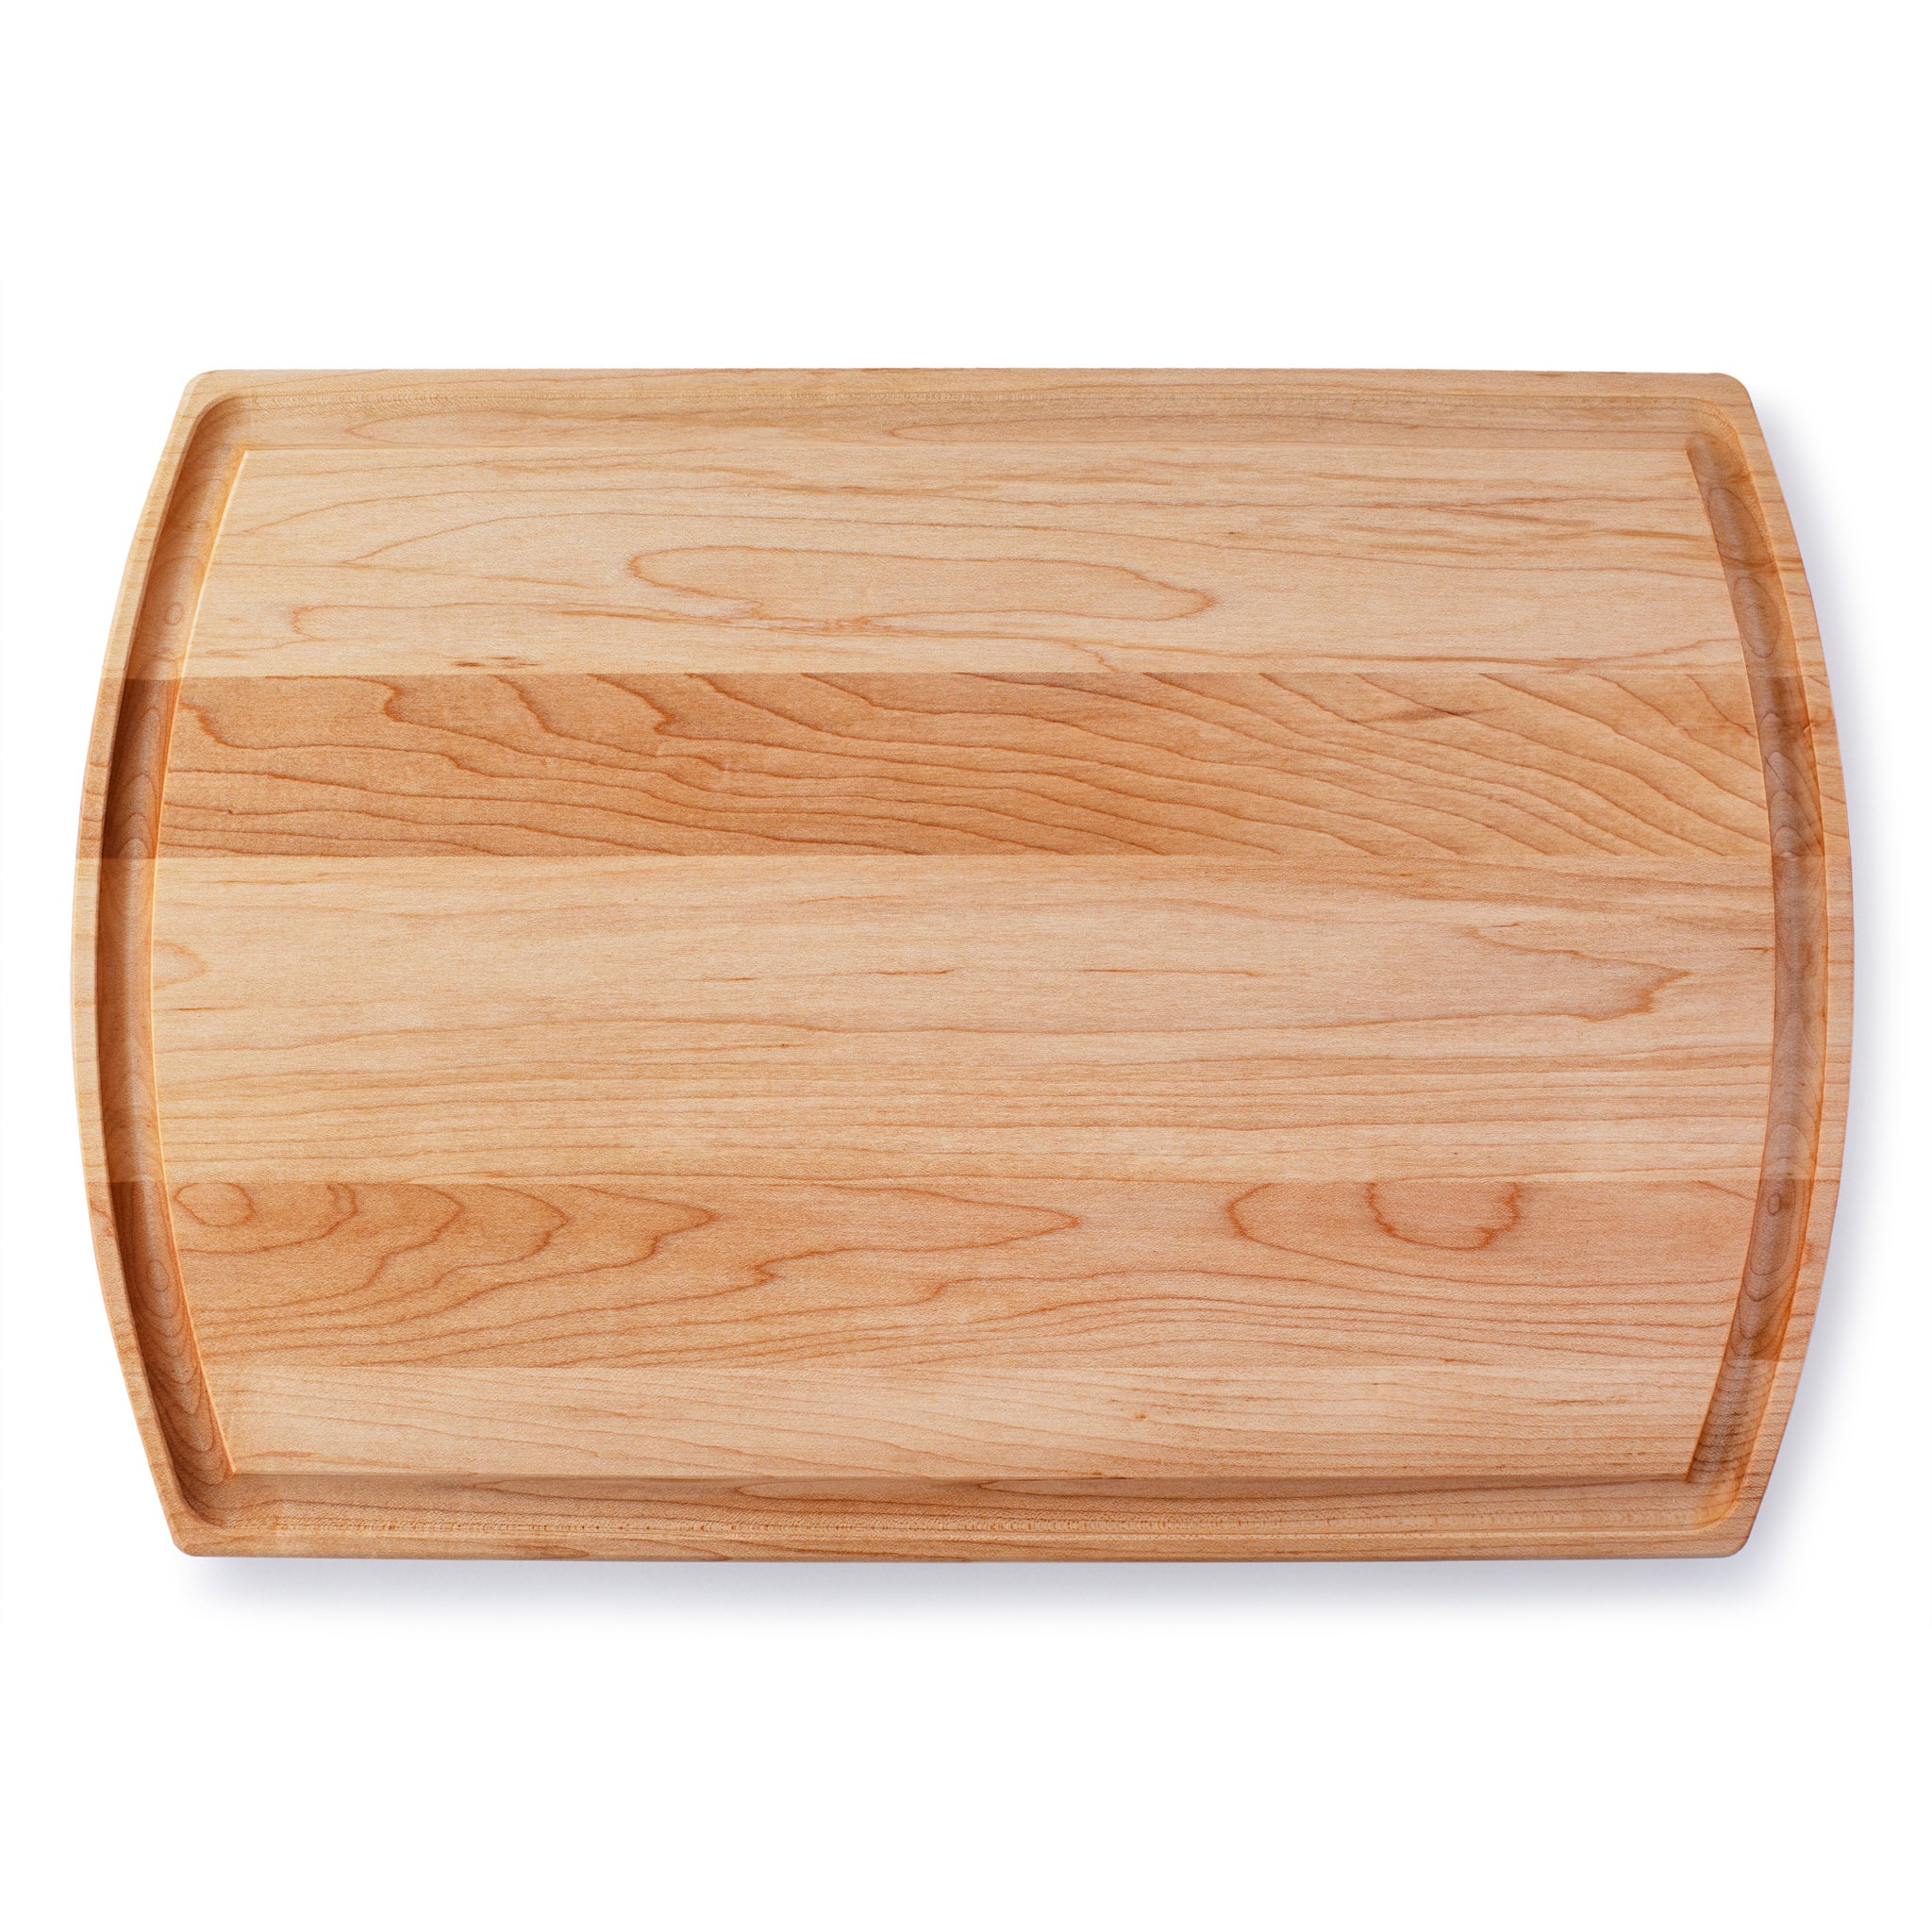 https://forest-decor.com/wp-content/uploads/large-wood-cutting-board-with-juice-groove-1.jpg